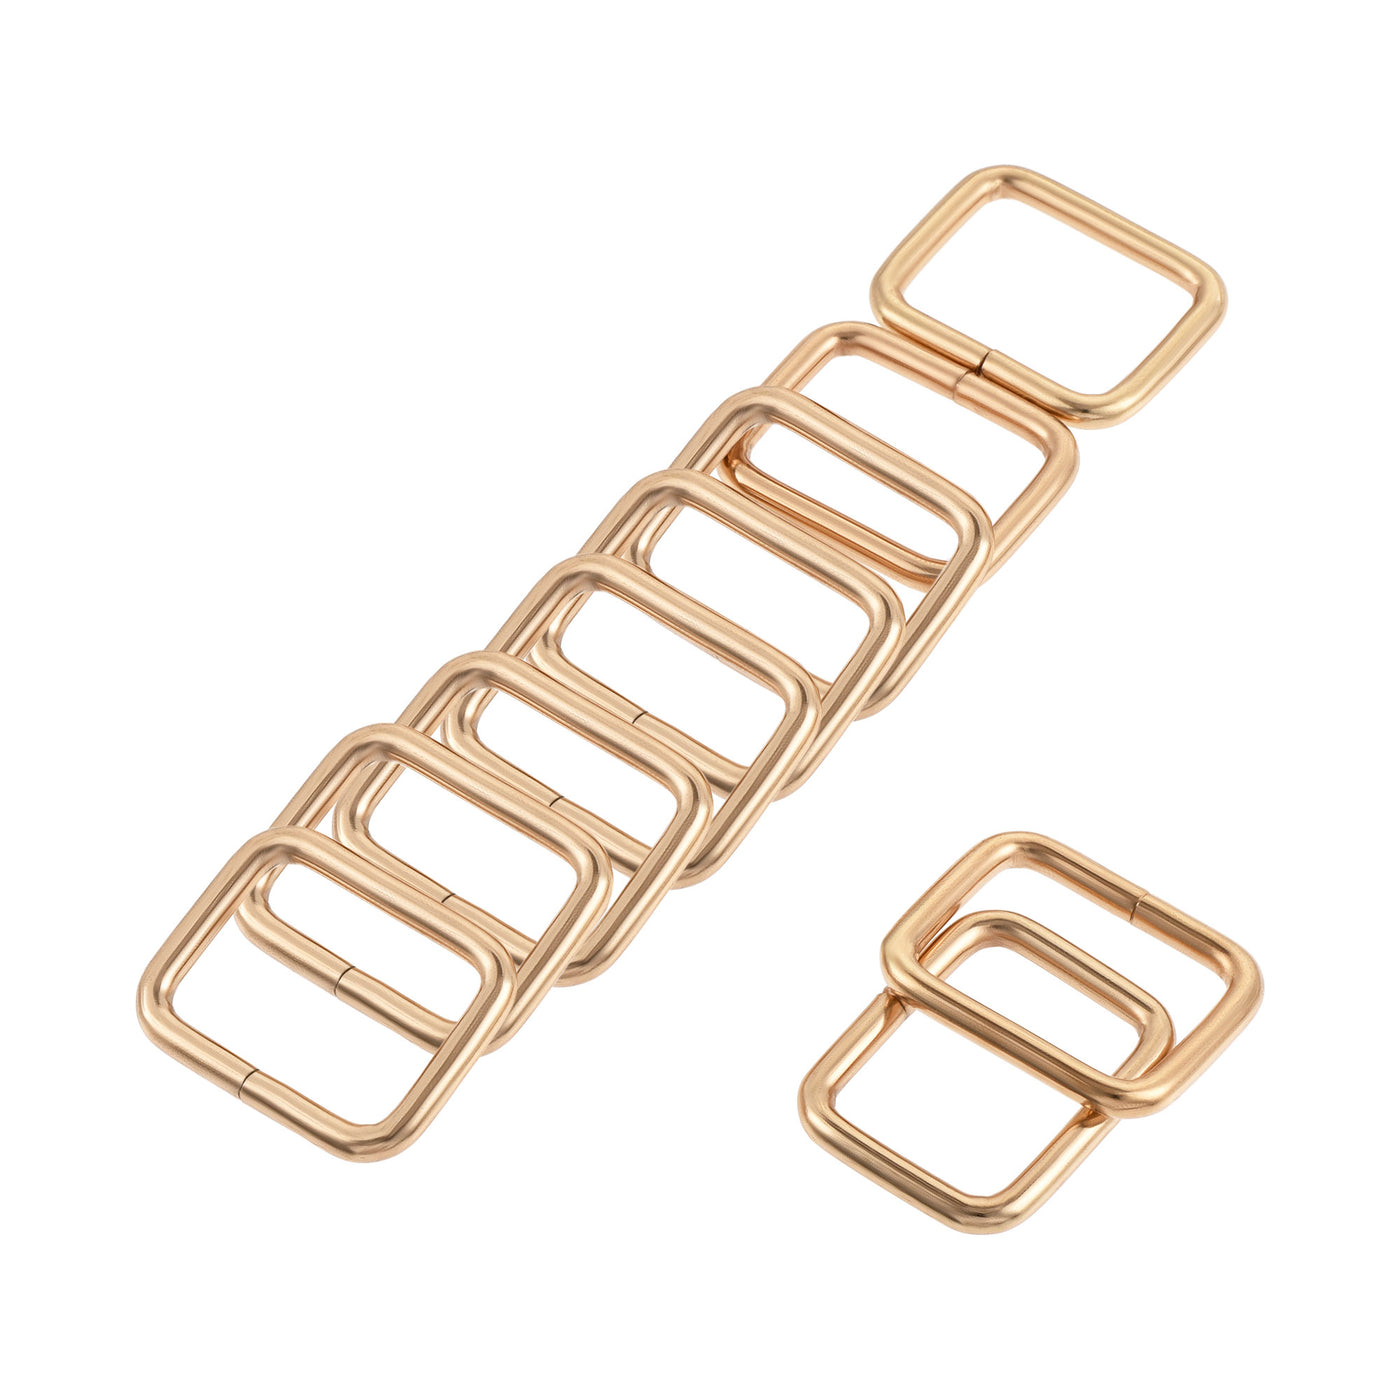 uxcell Uxcell Metal Rectangle Ring Buckles 25x20mm for Bags Belts DIY Gold Tone 20pcs